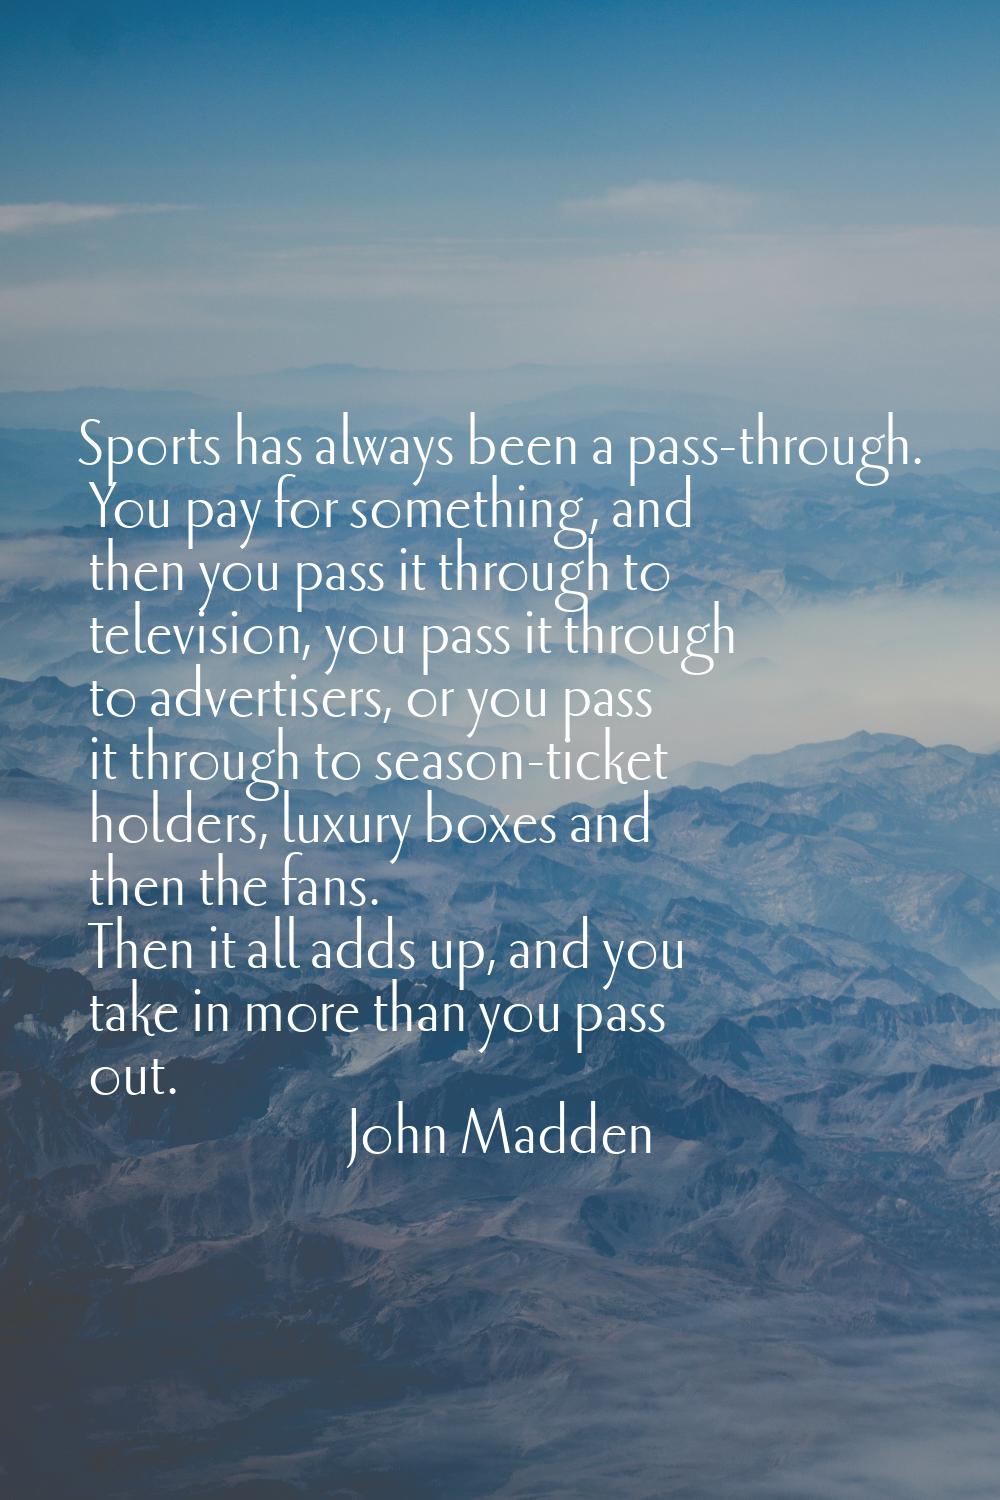 Sports has always been a pass-through. You pay for something, and then you pass it through to telev